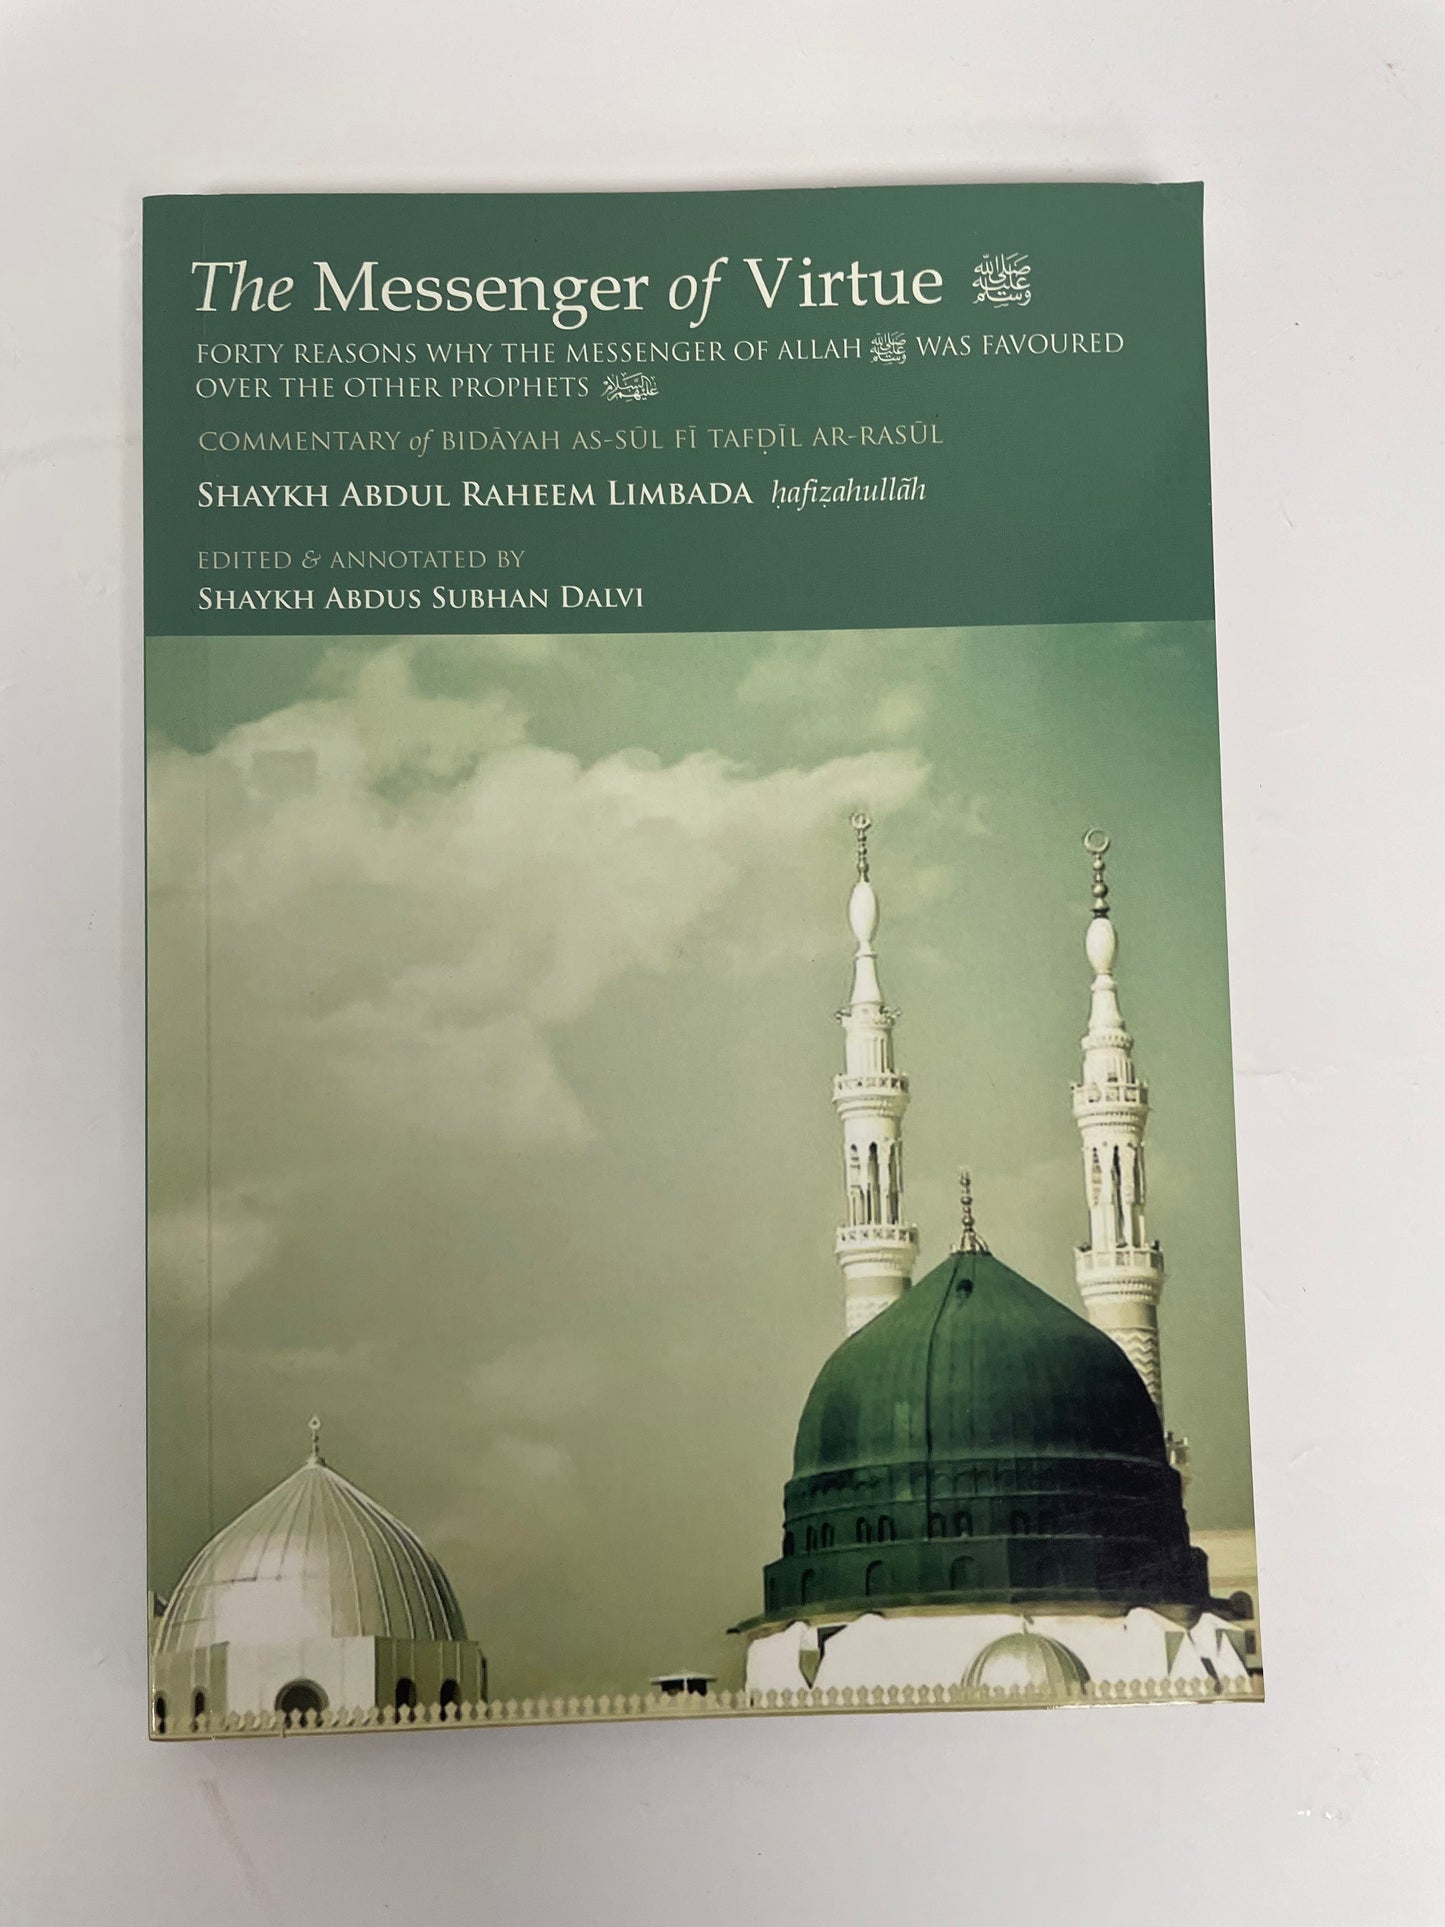 The Messenger of Virtue